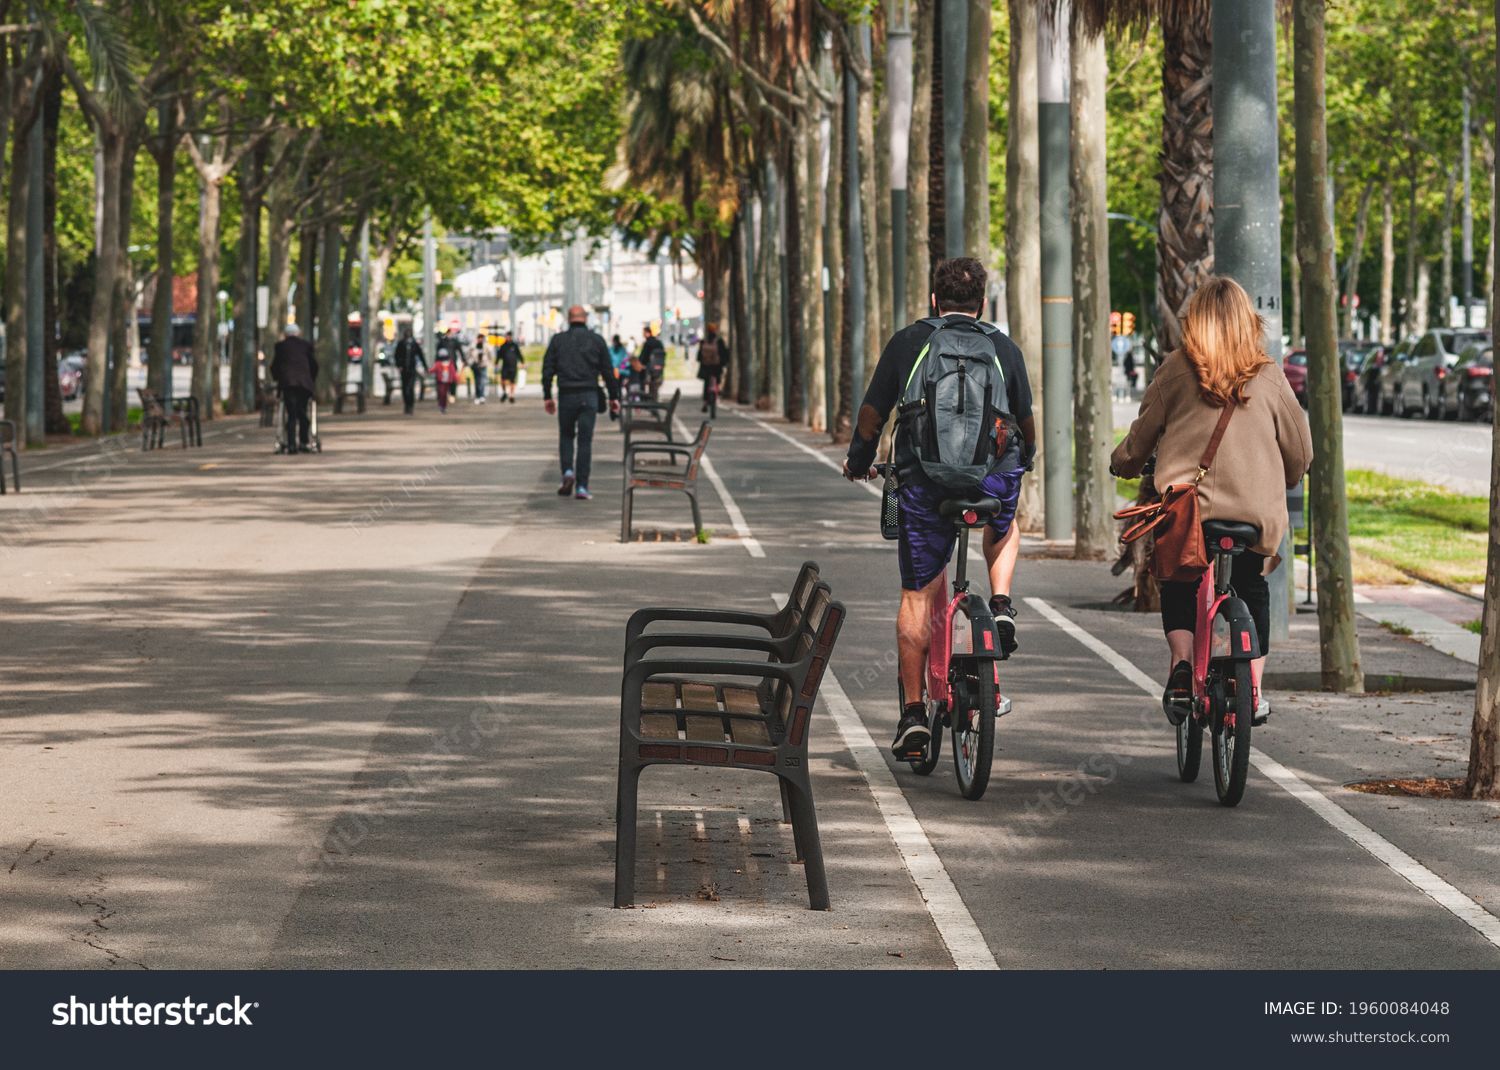 People on streets living and doing normal live in city biking sitting and walking on pedestrian way #1960084048